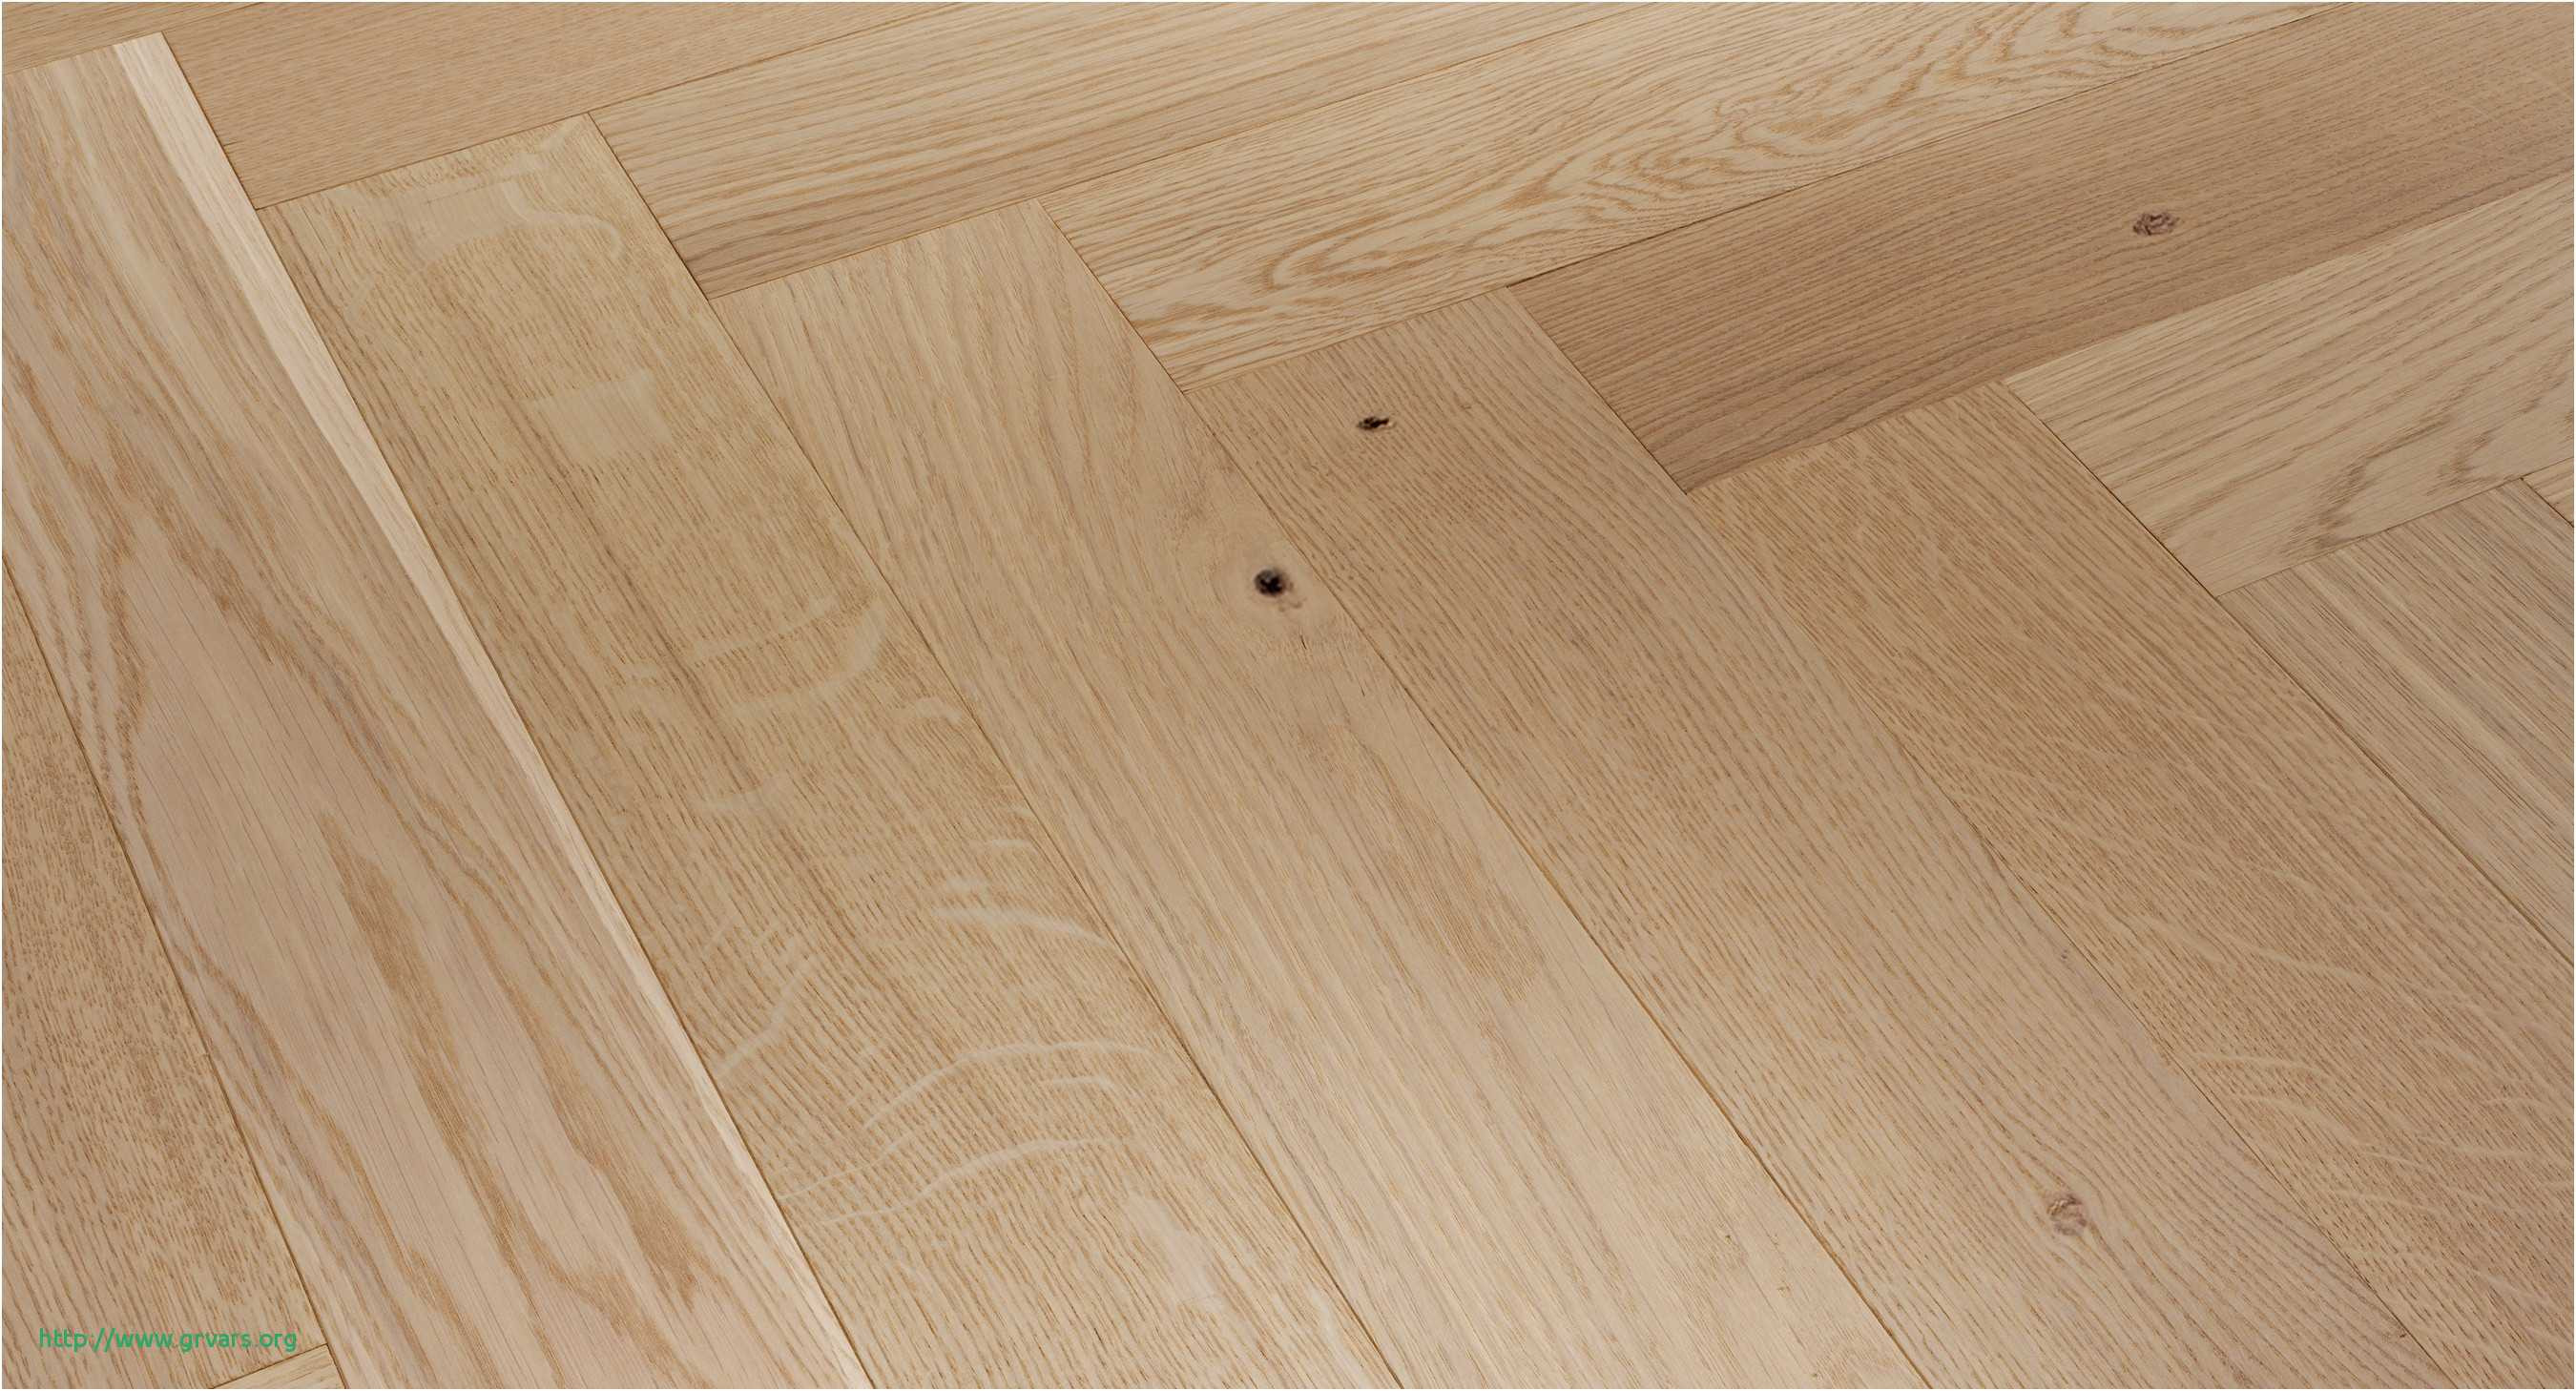 26 Lovely How to Install Quarter Round On Hardwood Floors 2024 free download how to install quarter round on hardwood floors of 23 beau how to replace floor trim ideas blog regarding how to replace floor trim ac289lagant flooring near me flooring sale near me stock 0